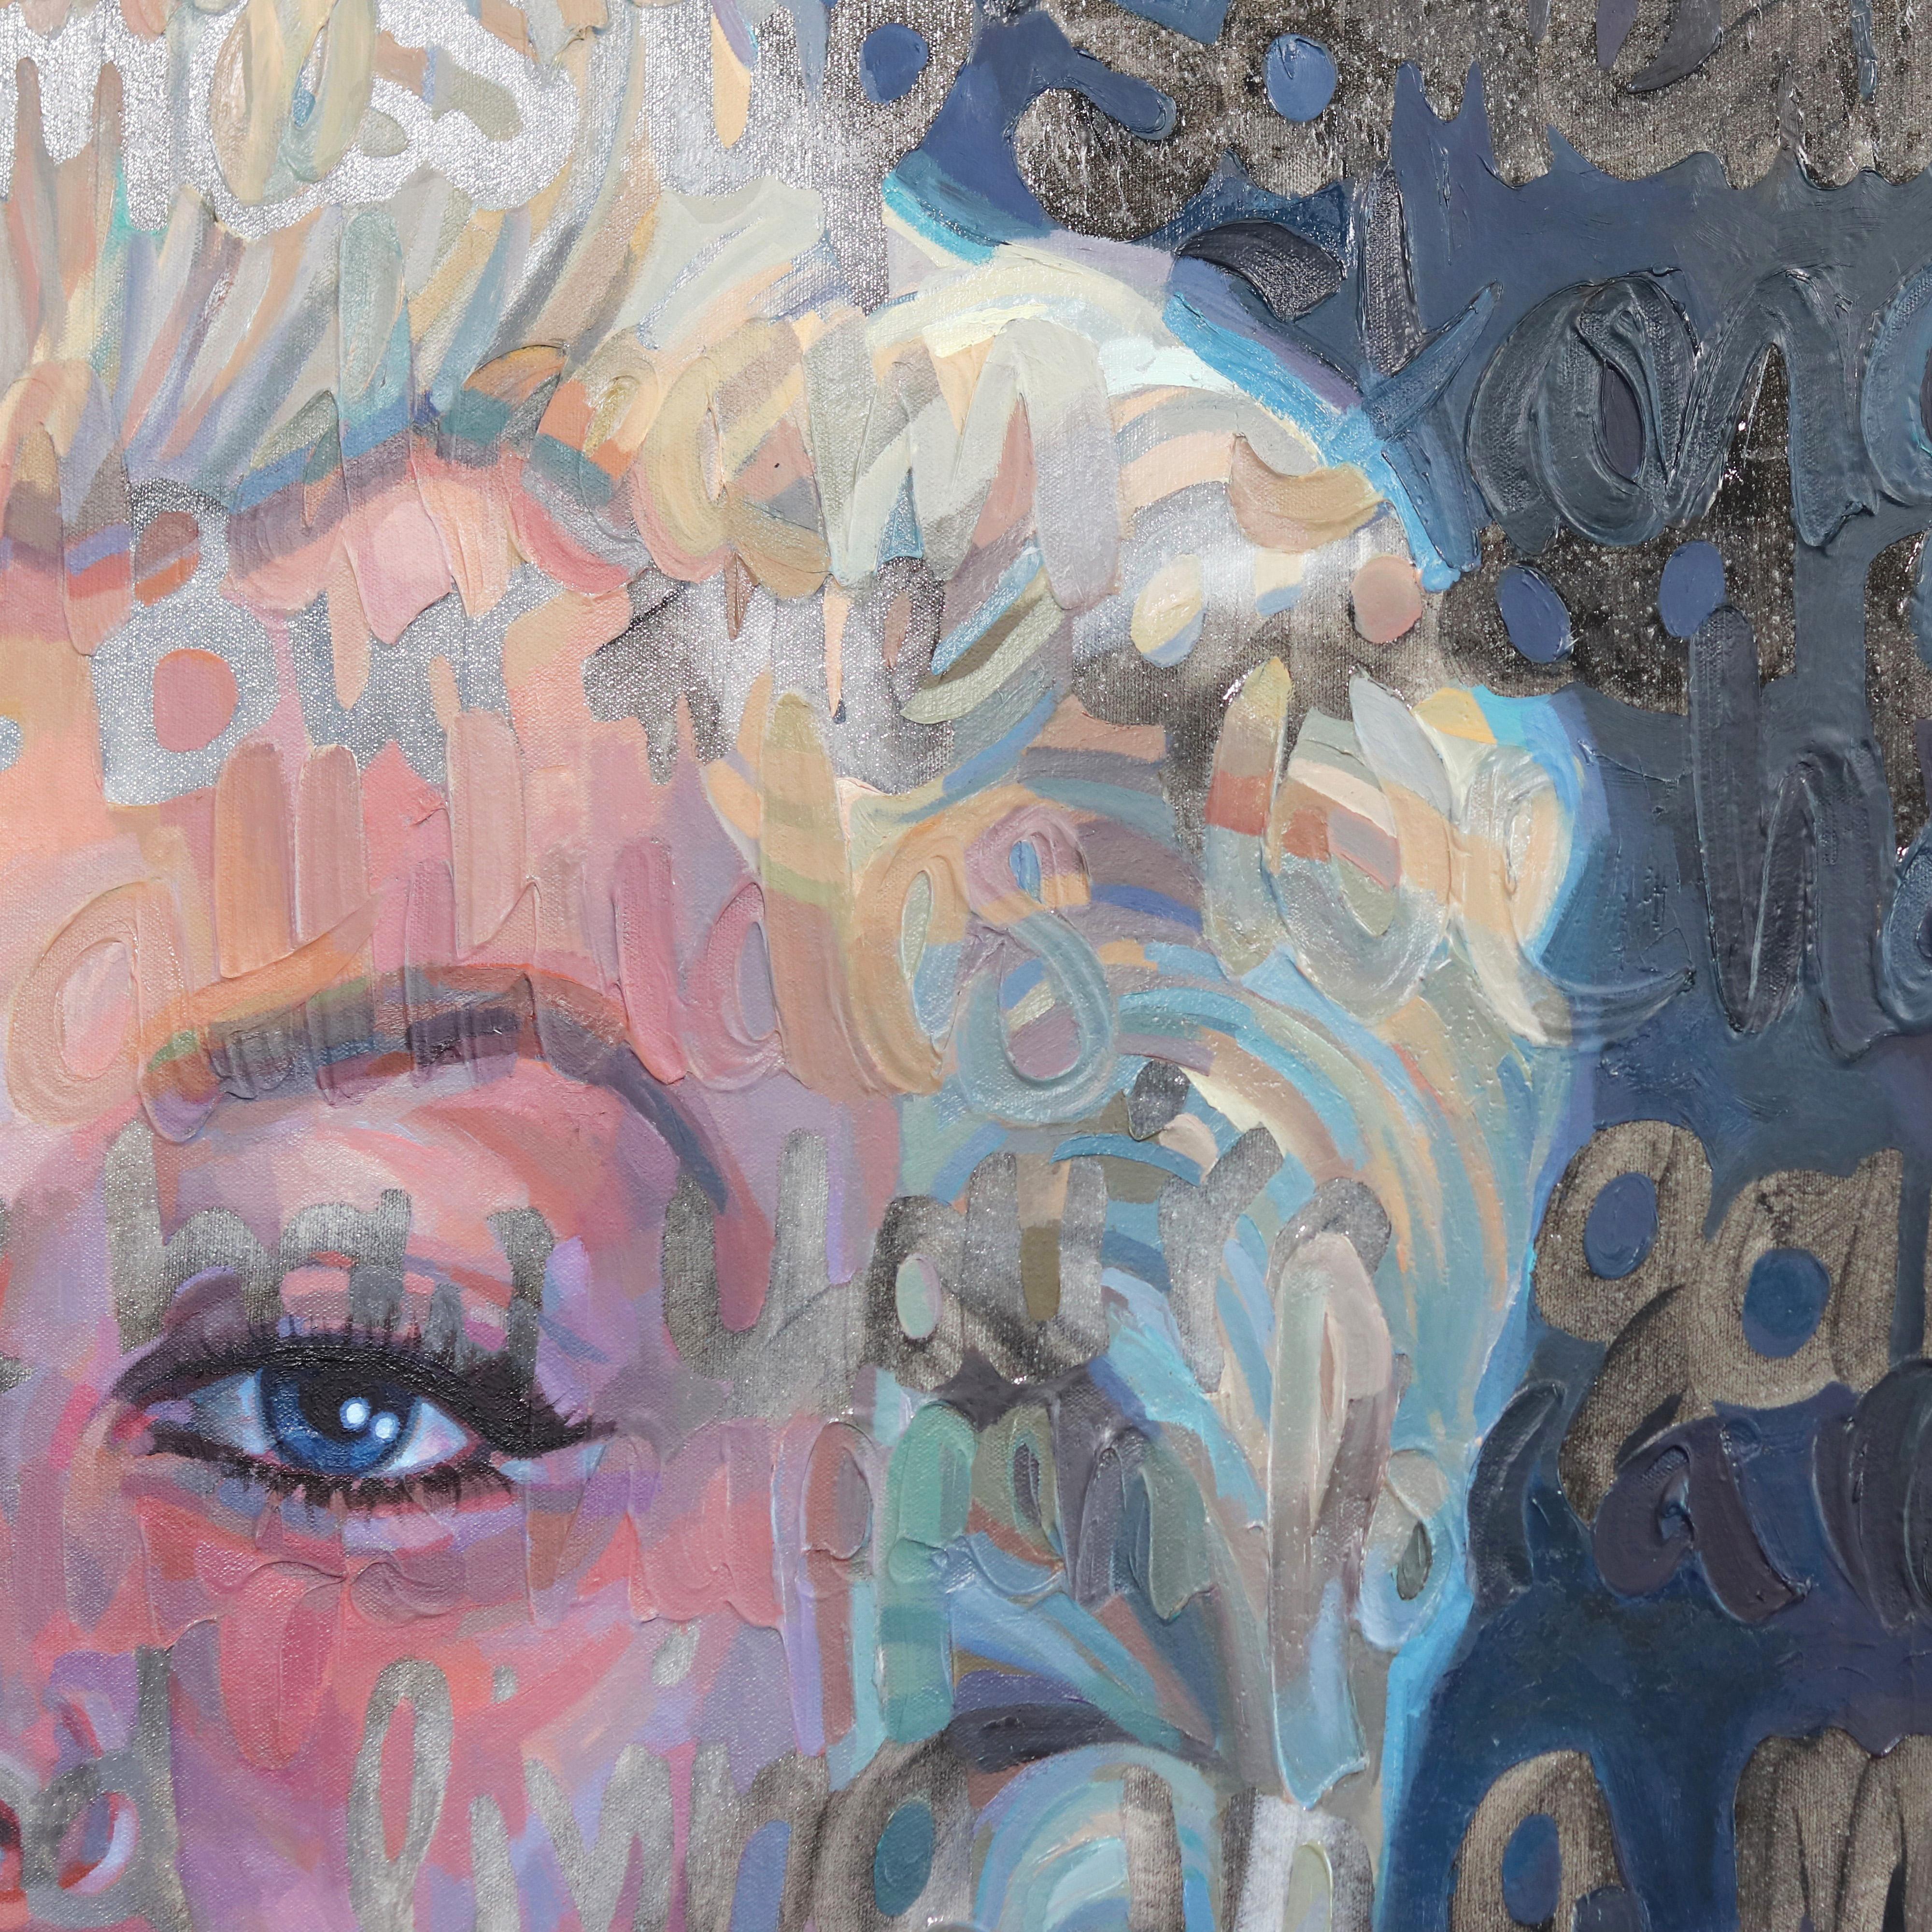 Marilyn Monroe - Strong Women - Textural Oil Painting and Image Immersed in Text - Black Figurative Painting by Christina Major